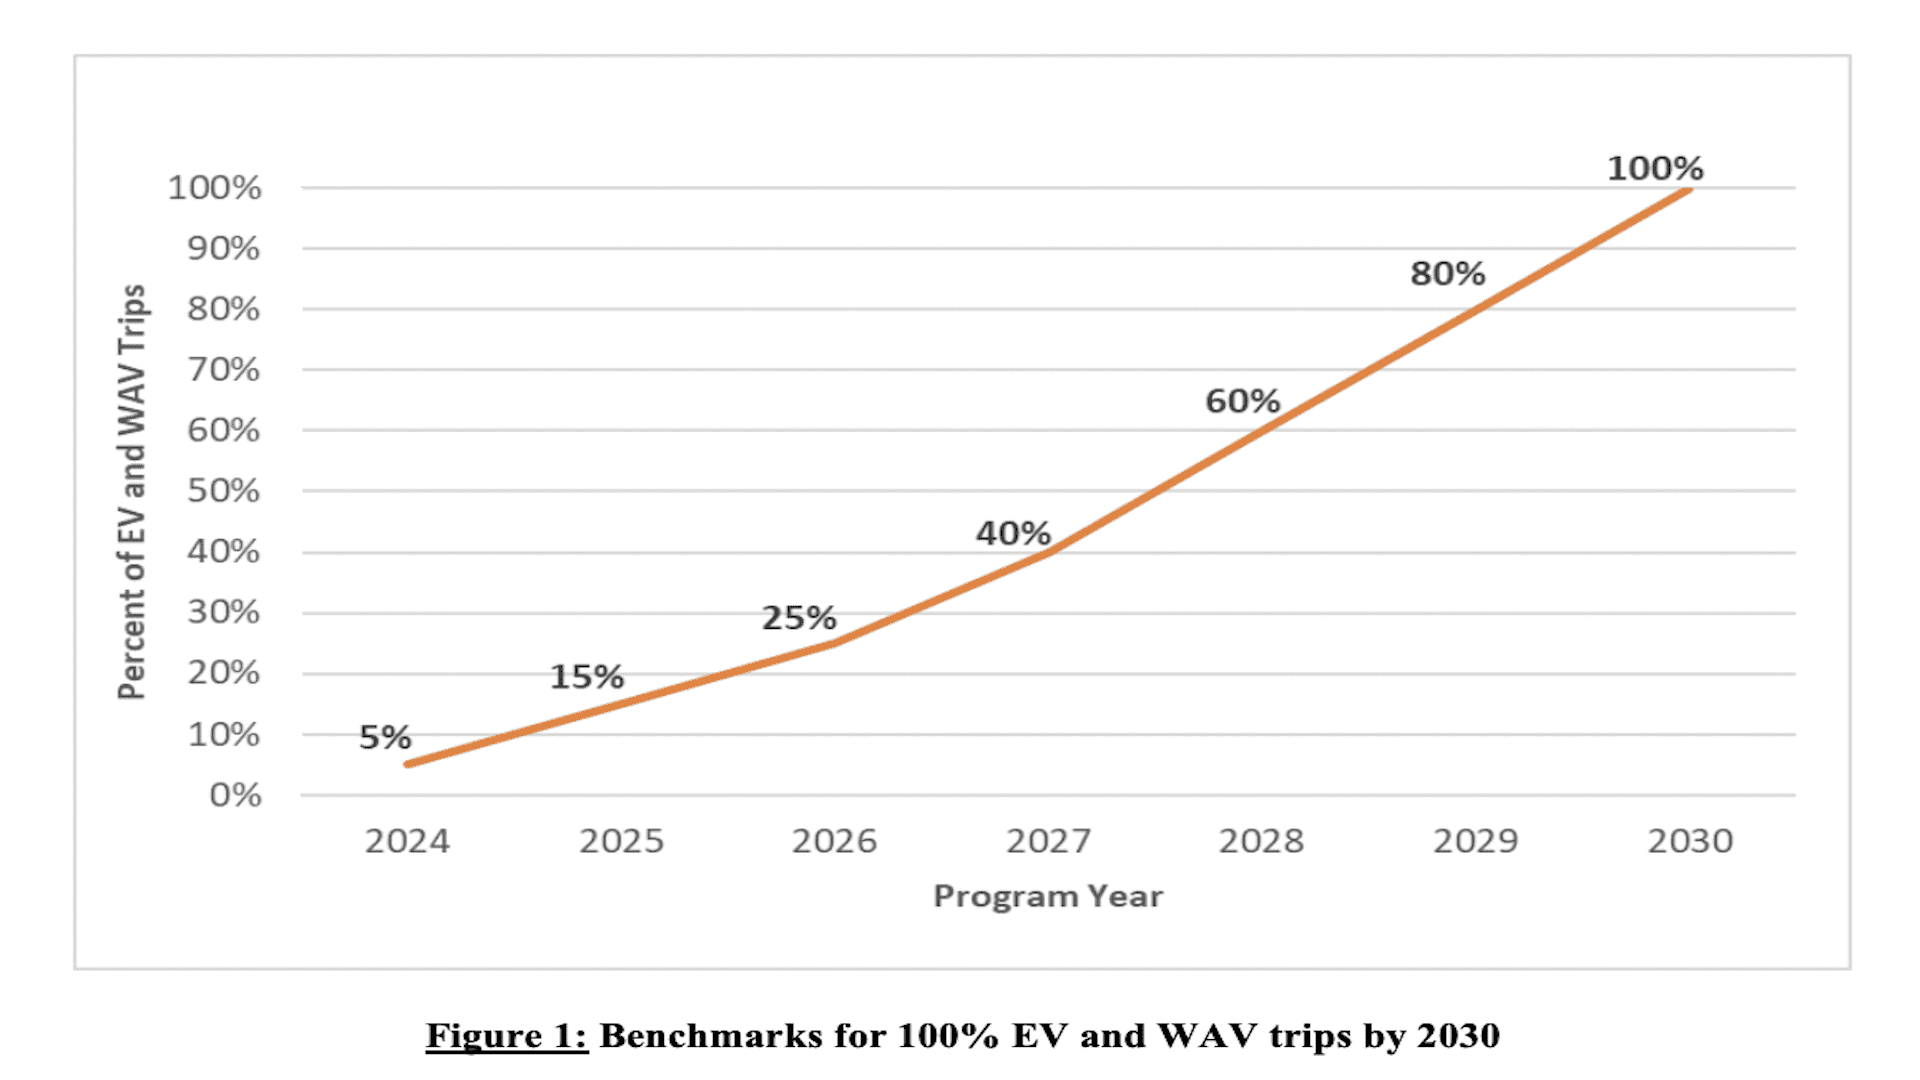 Benchmarks for 100% EV and WAV trips by 2030